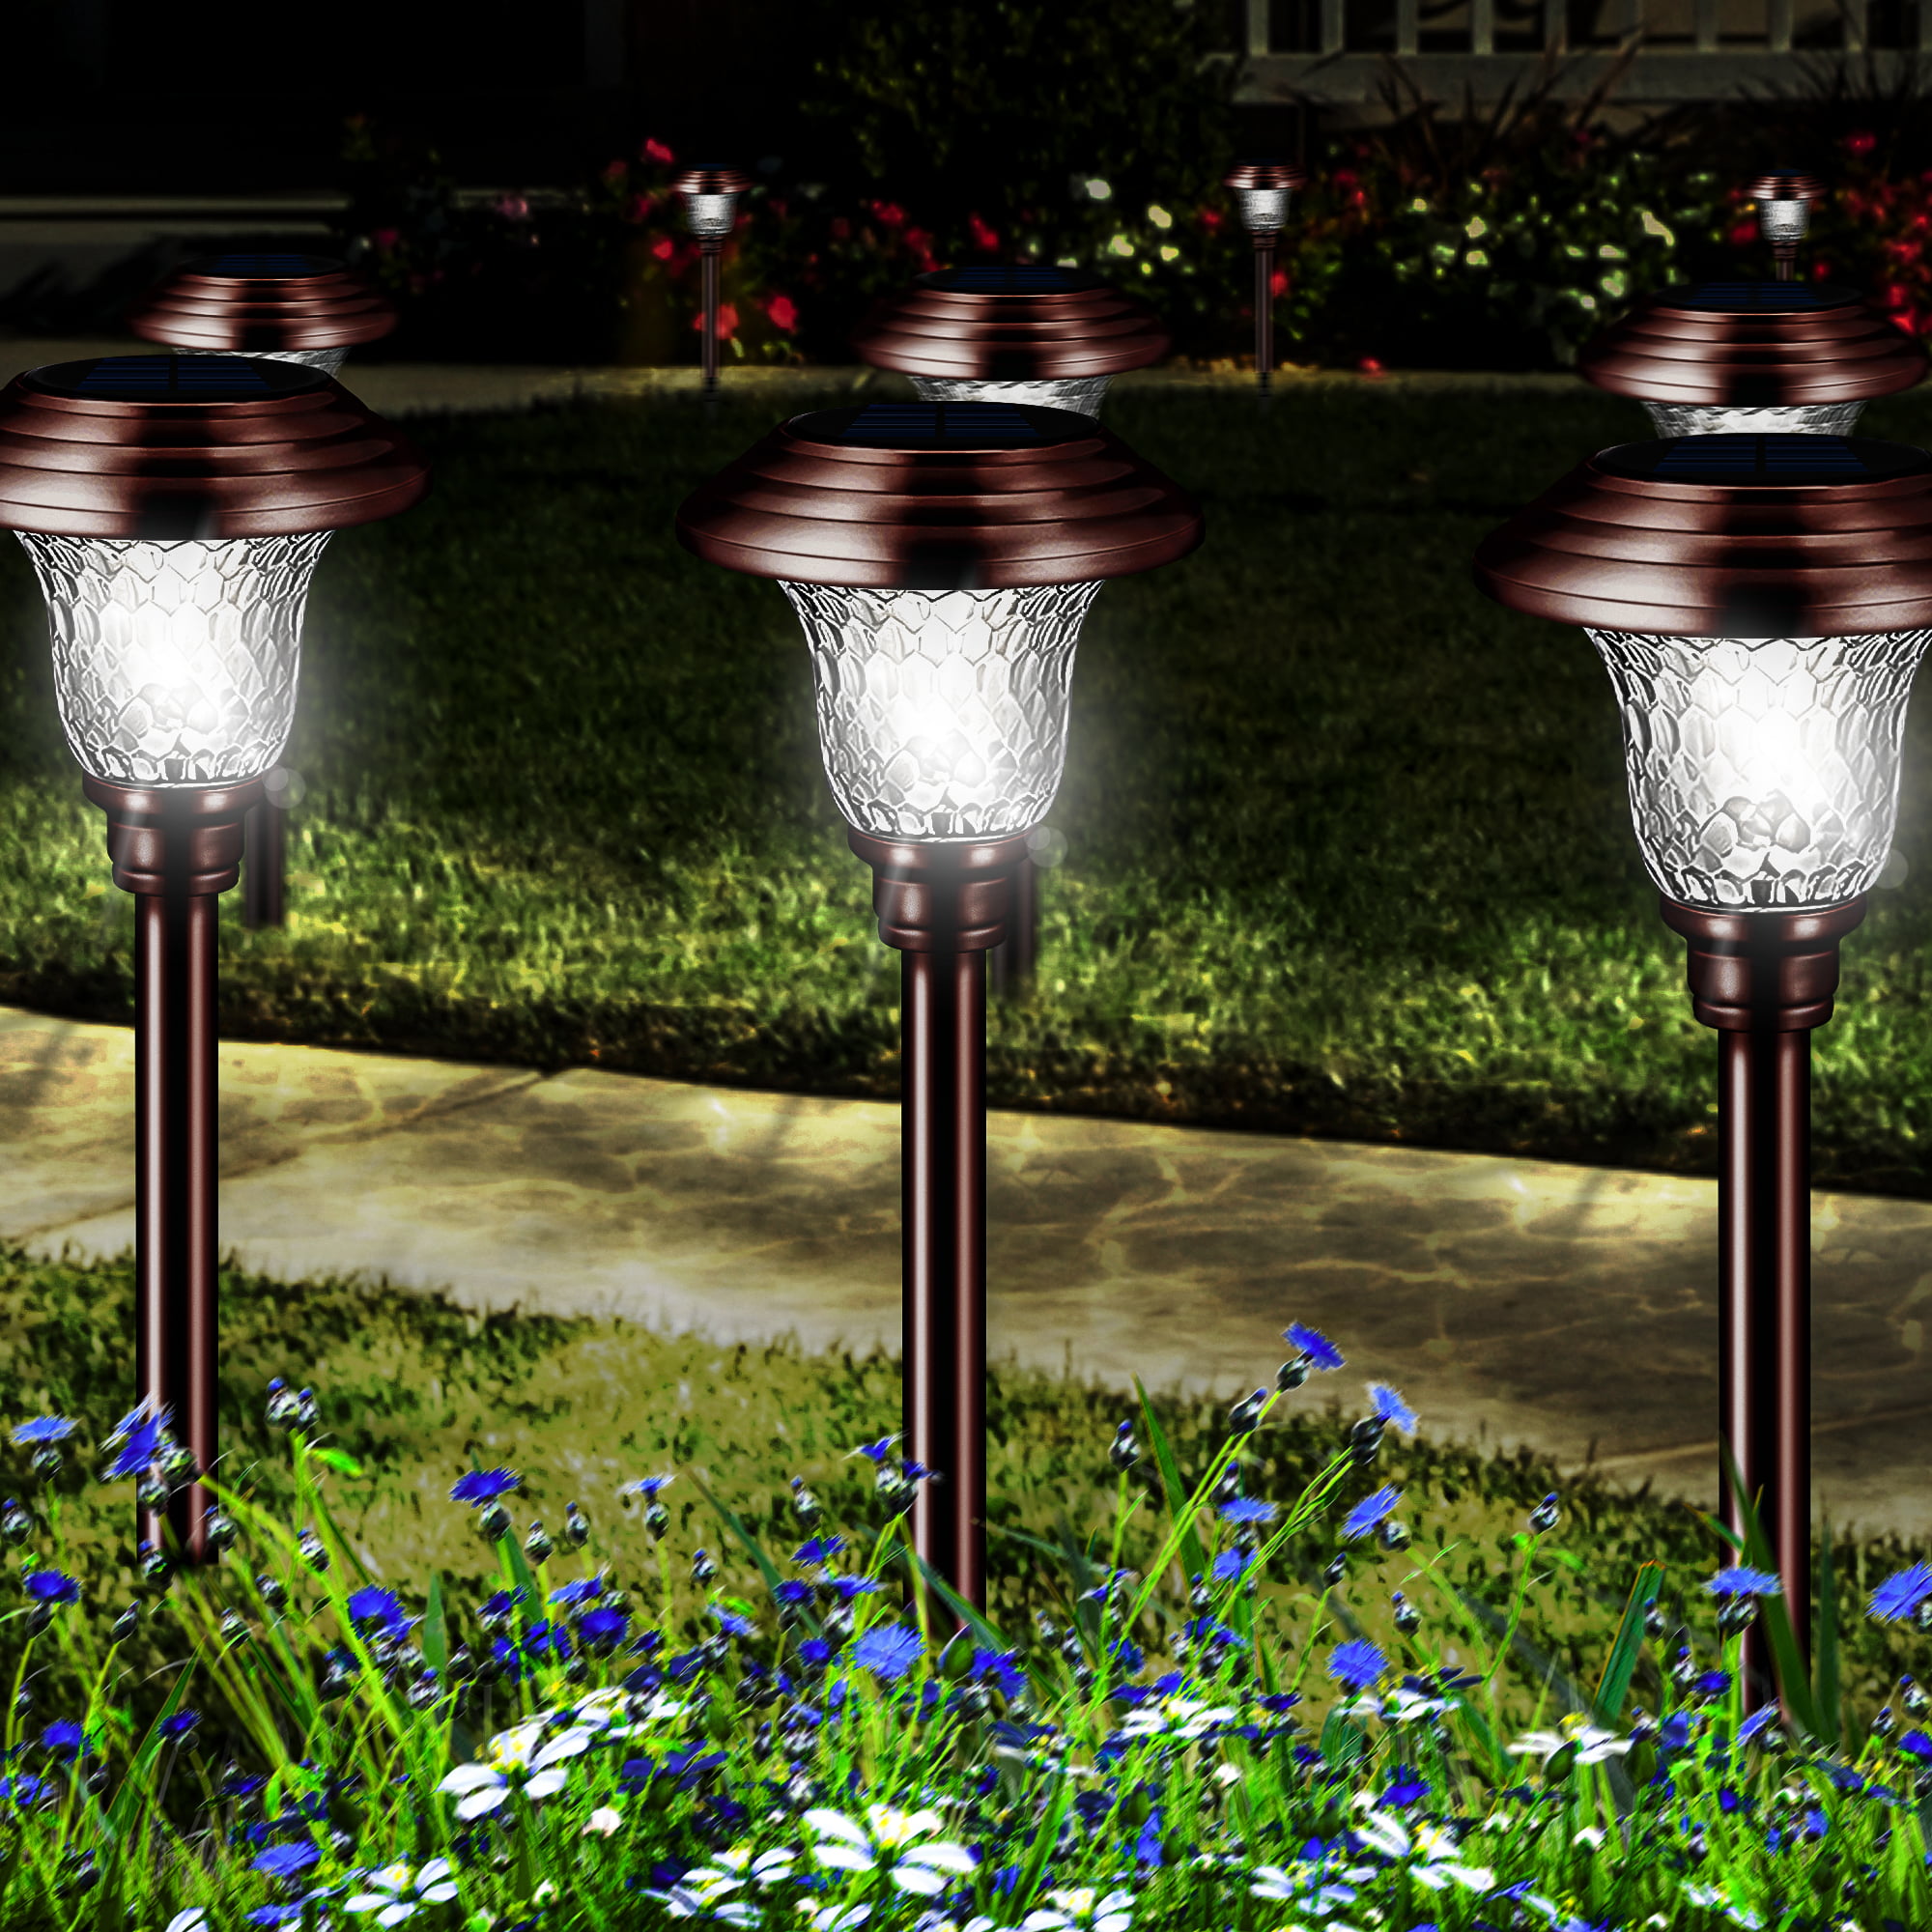 IOO Solar Torch Lights Outdoor Waterproof Dancing Flickering Flames Torches Landscape Decoration Lighting Security Path LED Light for Garden Pathways Yard Patio 2 Pack LTM01-2